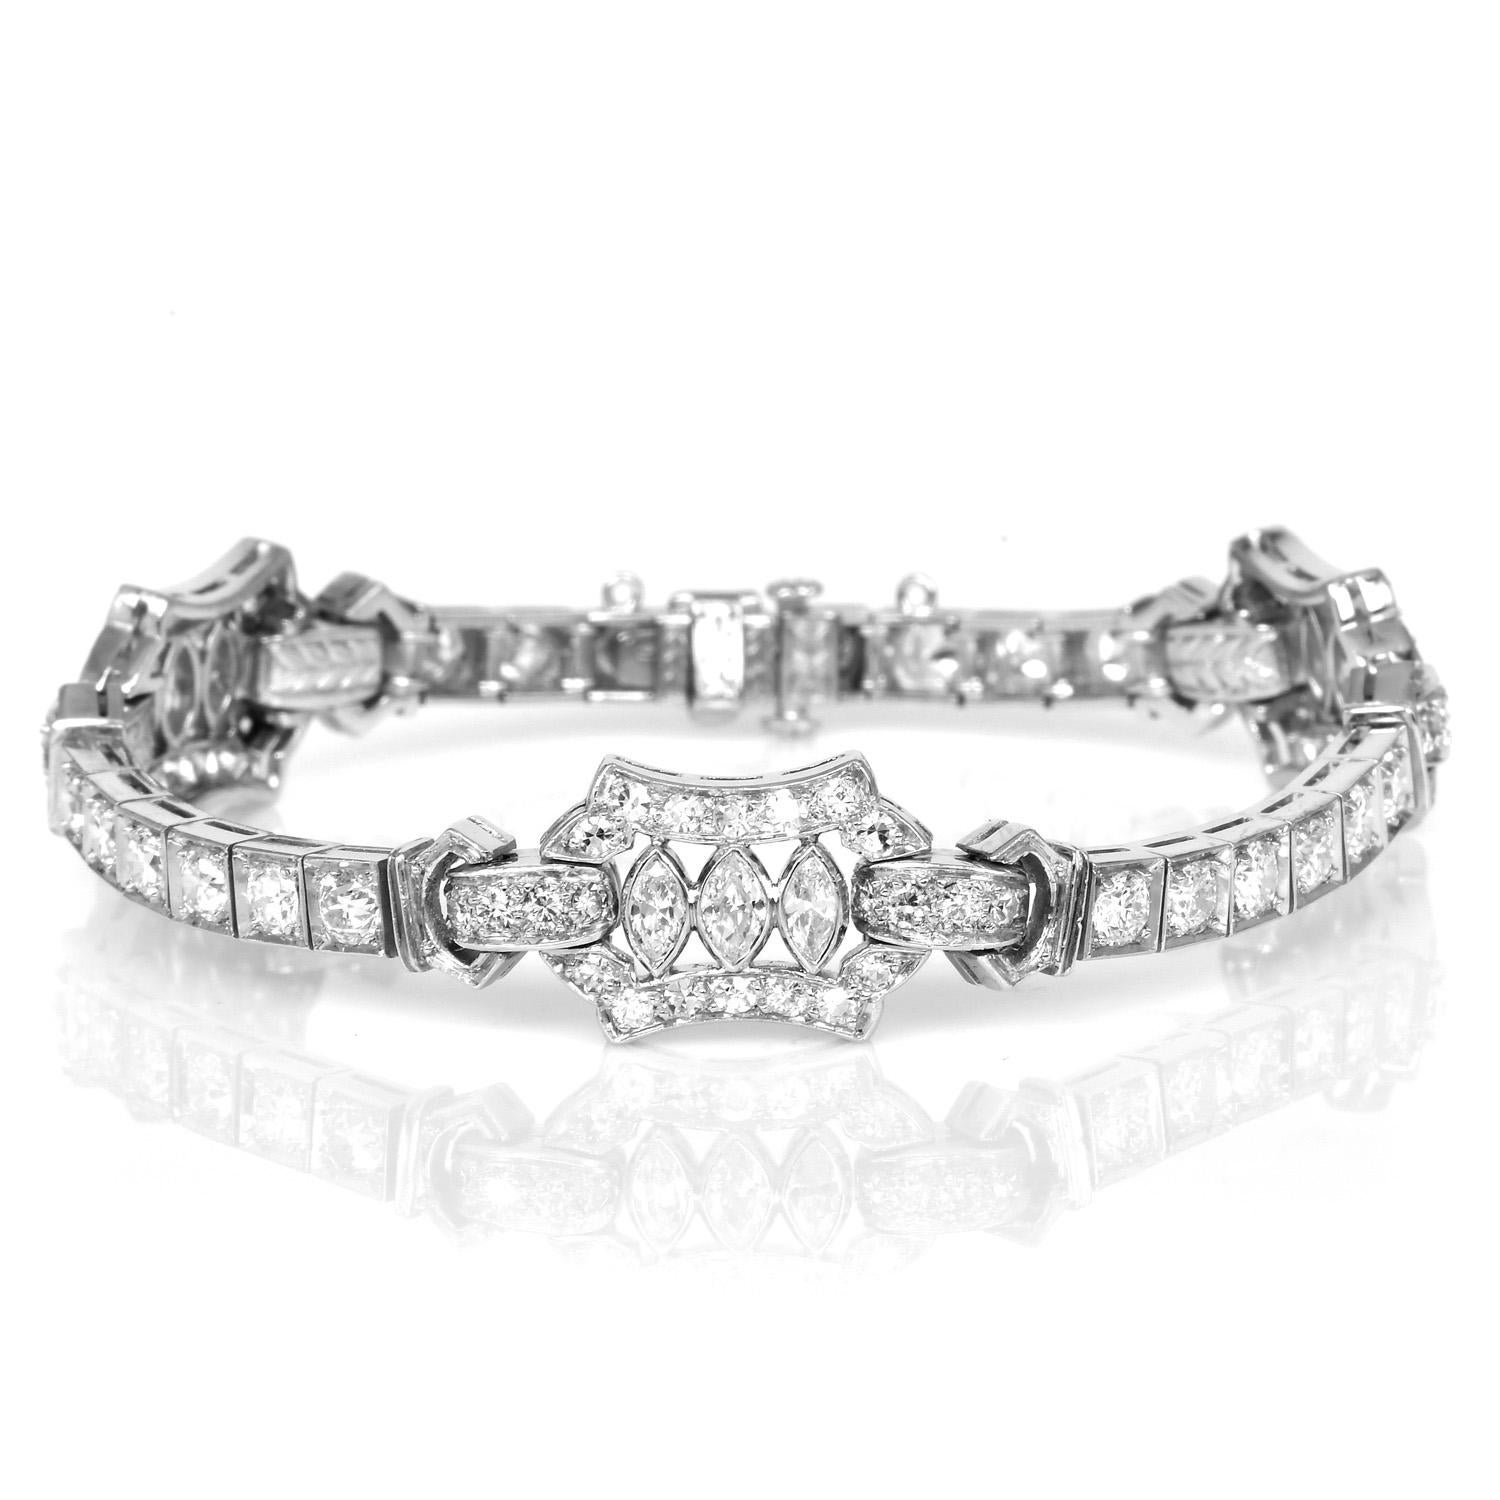 This diamond & platinum Bracelet with a refreshing and delicate Art deco Geometric design.

This vintage Deco is Expertly crafted in solid Platinum, Featuring.

(9) Genuine Diamonds Marquise cut, bezel-set, 

(20) Genuine Medium Diamonds round-cut &